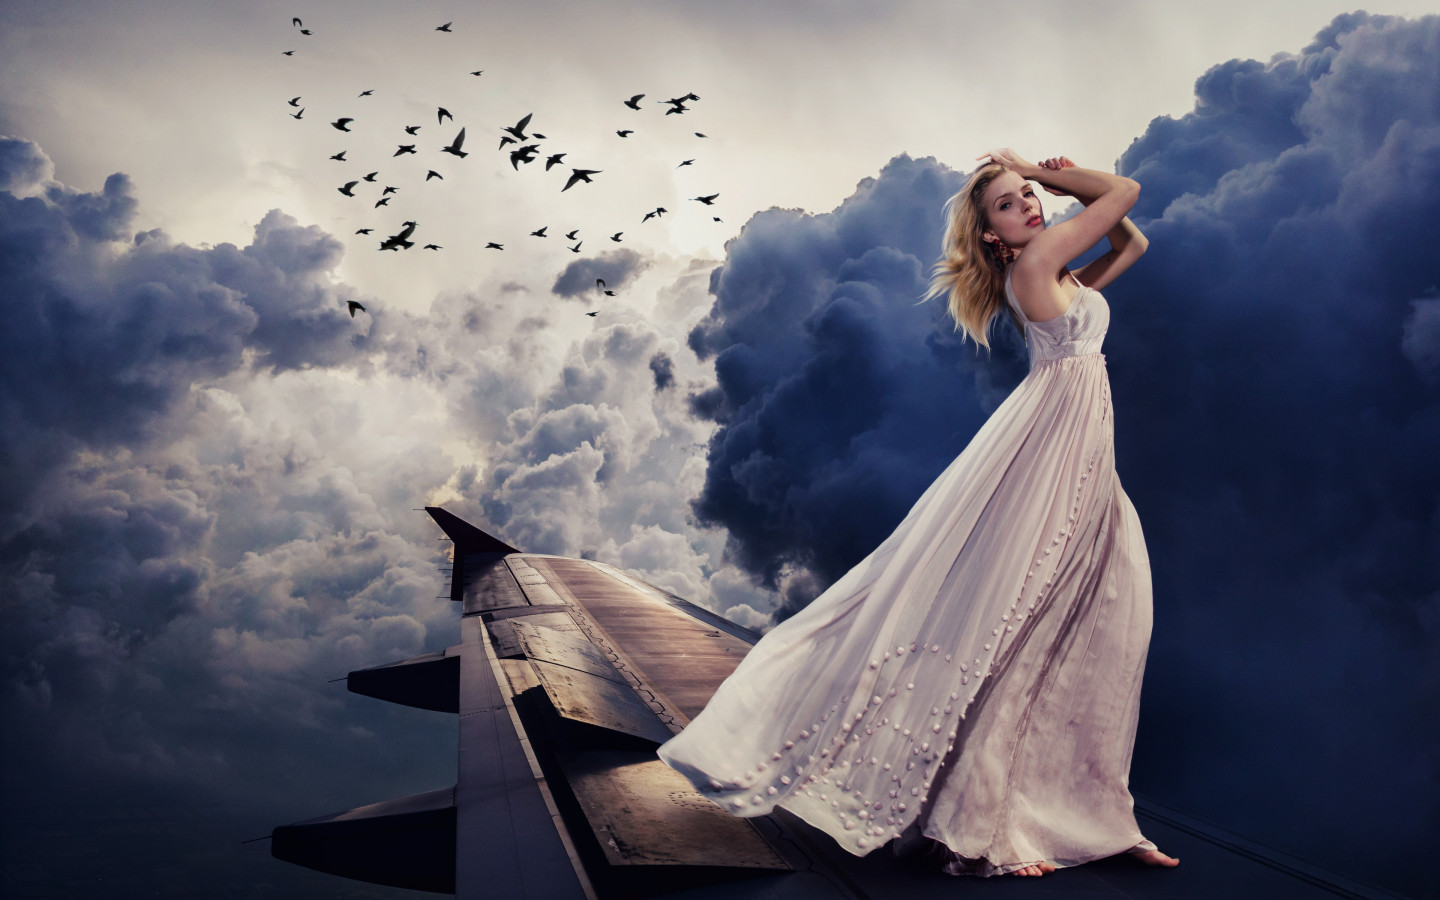 Beautiful girl on the airplane wing wallpaper 1440x900